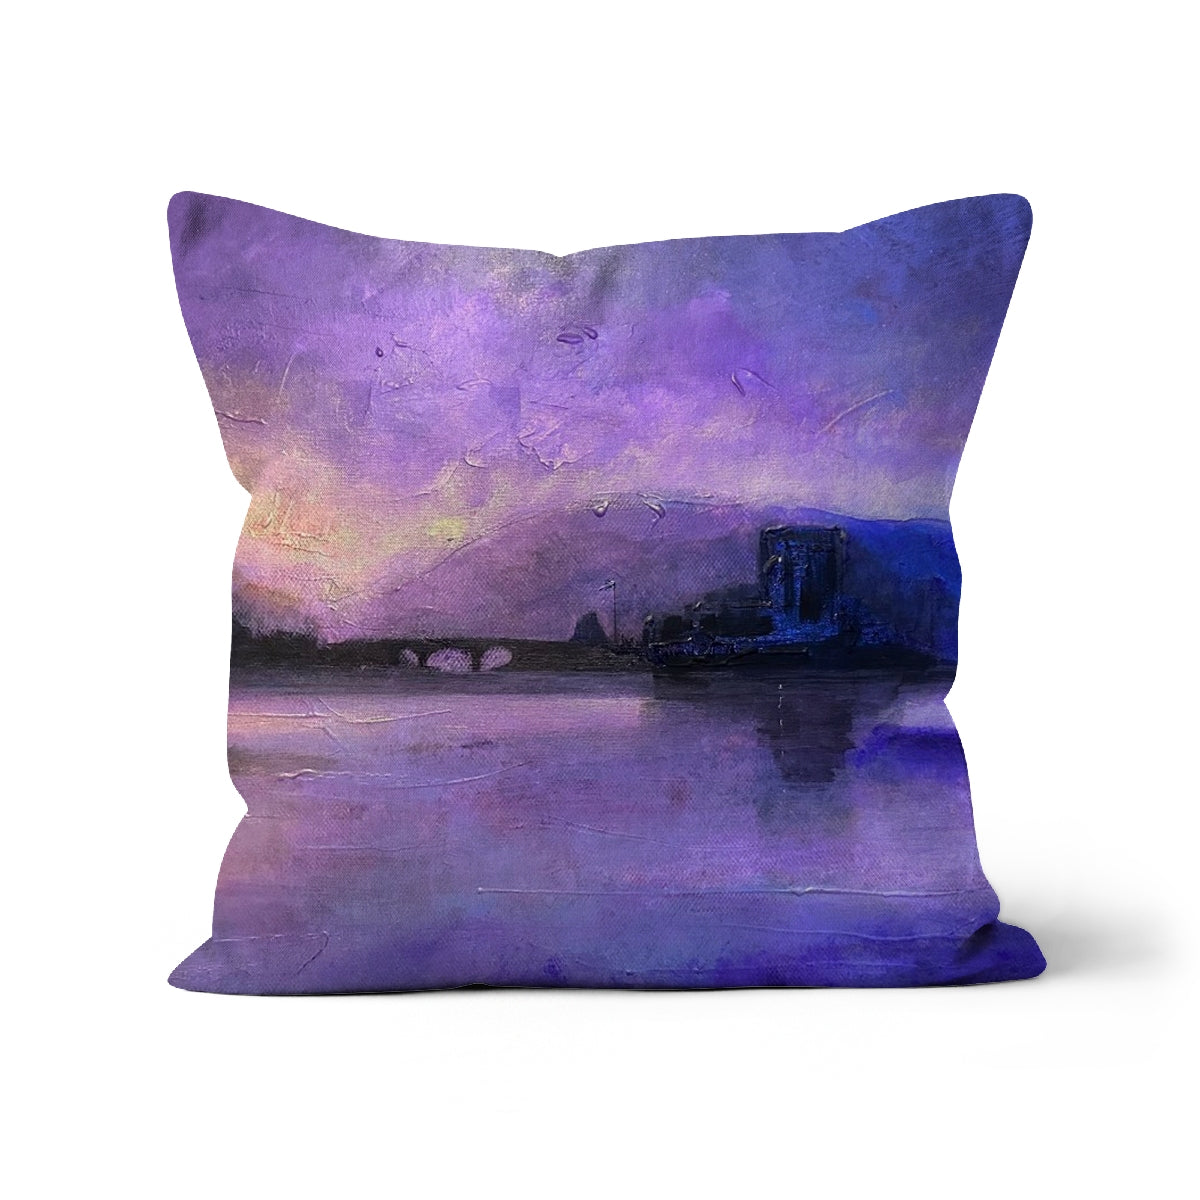 Eilean Donan Castle Moonset Art Gifts Cushion-Cushions-Historic & Iconic Scotland Art Gallery-Canvas-18"x18"-Paintings, Prints, Homeware, Art Gifts From Scotland By Scottish Artist Kevin Hunter